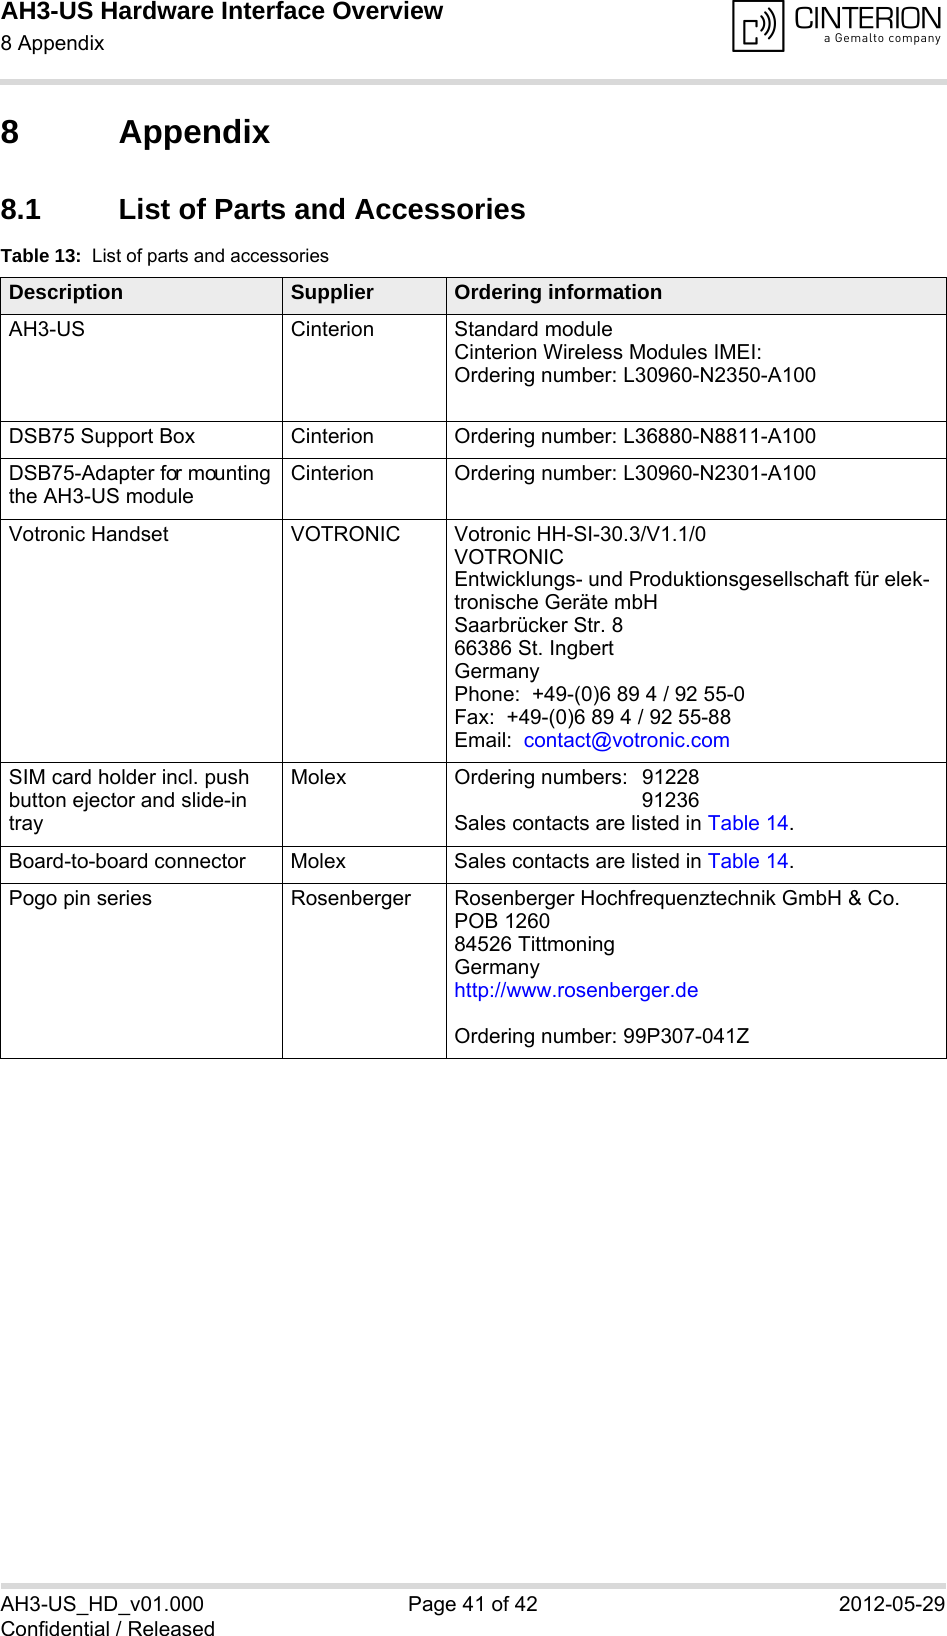 AH3-US Hardware Interface Overview8 Appendix42AH3-US_HD_v01.000 Page 41 of 42 2012-05-29Confidential / Released8 Appendix8.1 List of Parts and AccessoriesTable 13:  List of parts and accessoriesDescription Supplier Ordering informationAH3-US Cinterion Standard module Cinterion Wireless Modules IMEI:Ordering number: L30960-N2350-A100DSB75 Support Box Cinterion Ordering number: L36880-N8811-A100DSB75-Adapter  for mounting  the AH3-US moduleCinterion Ordering number: L30960-N2301-A100Votronic Handset VOTRONIC Votronic HH-SI-30.3/V1.1/0VOTRONIC Entwicklungs- und Produktionsgesellschaft für elek-tronische Geräte mbHSaarbrücker Str. 866386 St. IngbertGermanyPhone:  +49-(0)6 89 4 / 92 55-0Fax:  +49-(0)6 89 4 / 92 55-88Email:  contact@votronic.comSIM card holder incl. push button ejector and slide-in trayMolex Ordering numbers:  91228 91236Sales contacts are listed in Table 14.Board-to-board connector Molex Sales contacts are listed in Table 14.Pogo pin series  Rosenberger Rosenberger Hochfrequenztechnik GmbH &amp; Co.POB 126084526 TittmoningGermanyhttp://www.rosenberger.deOrdering number: 99P307-041Z